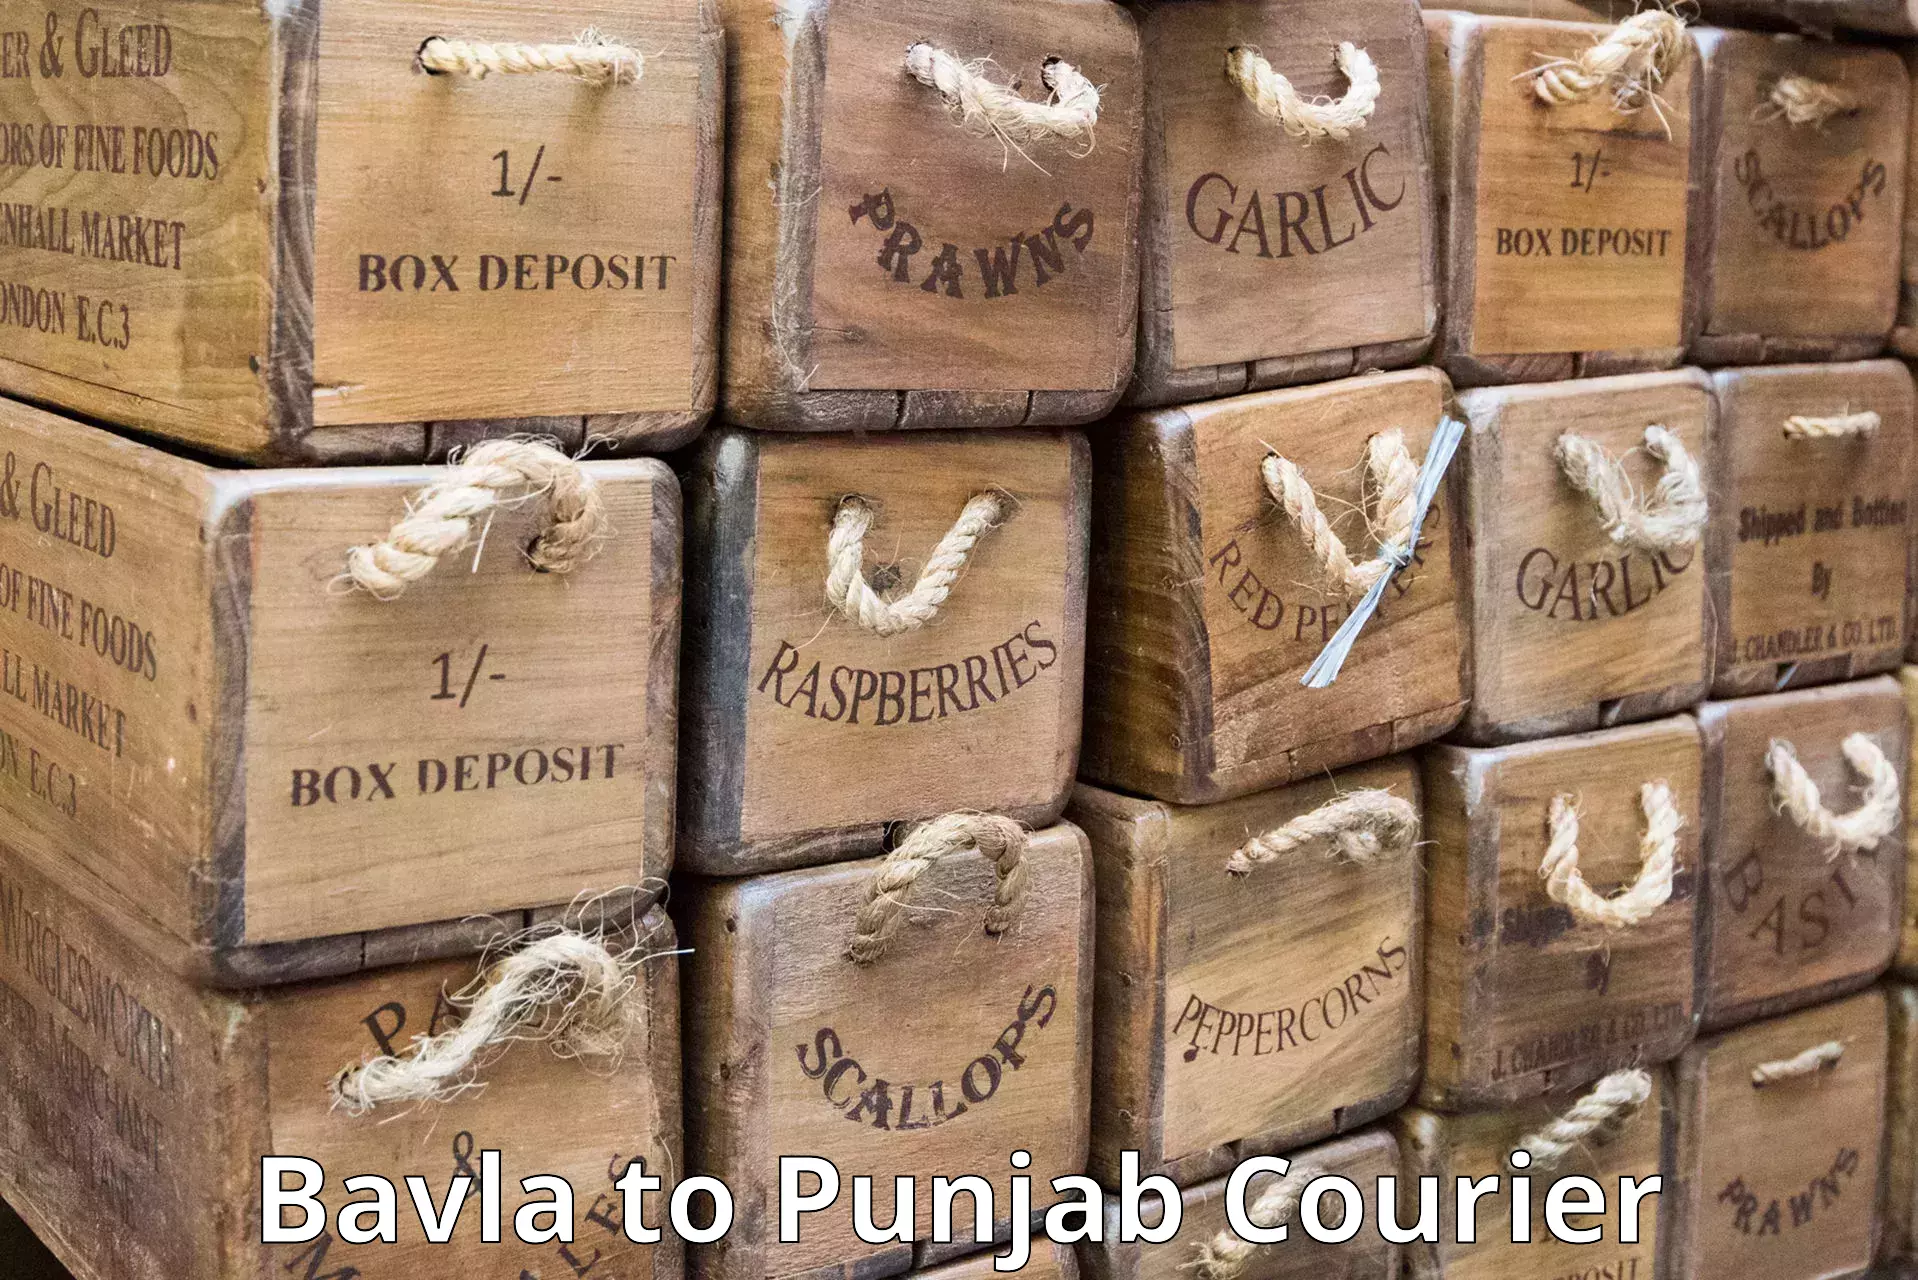 Residential courier service Bavla to Patiala